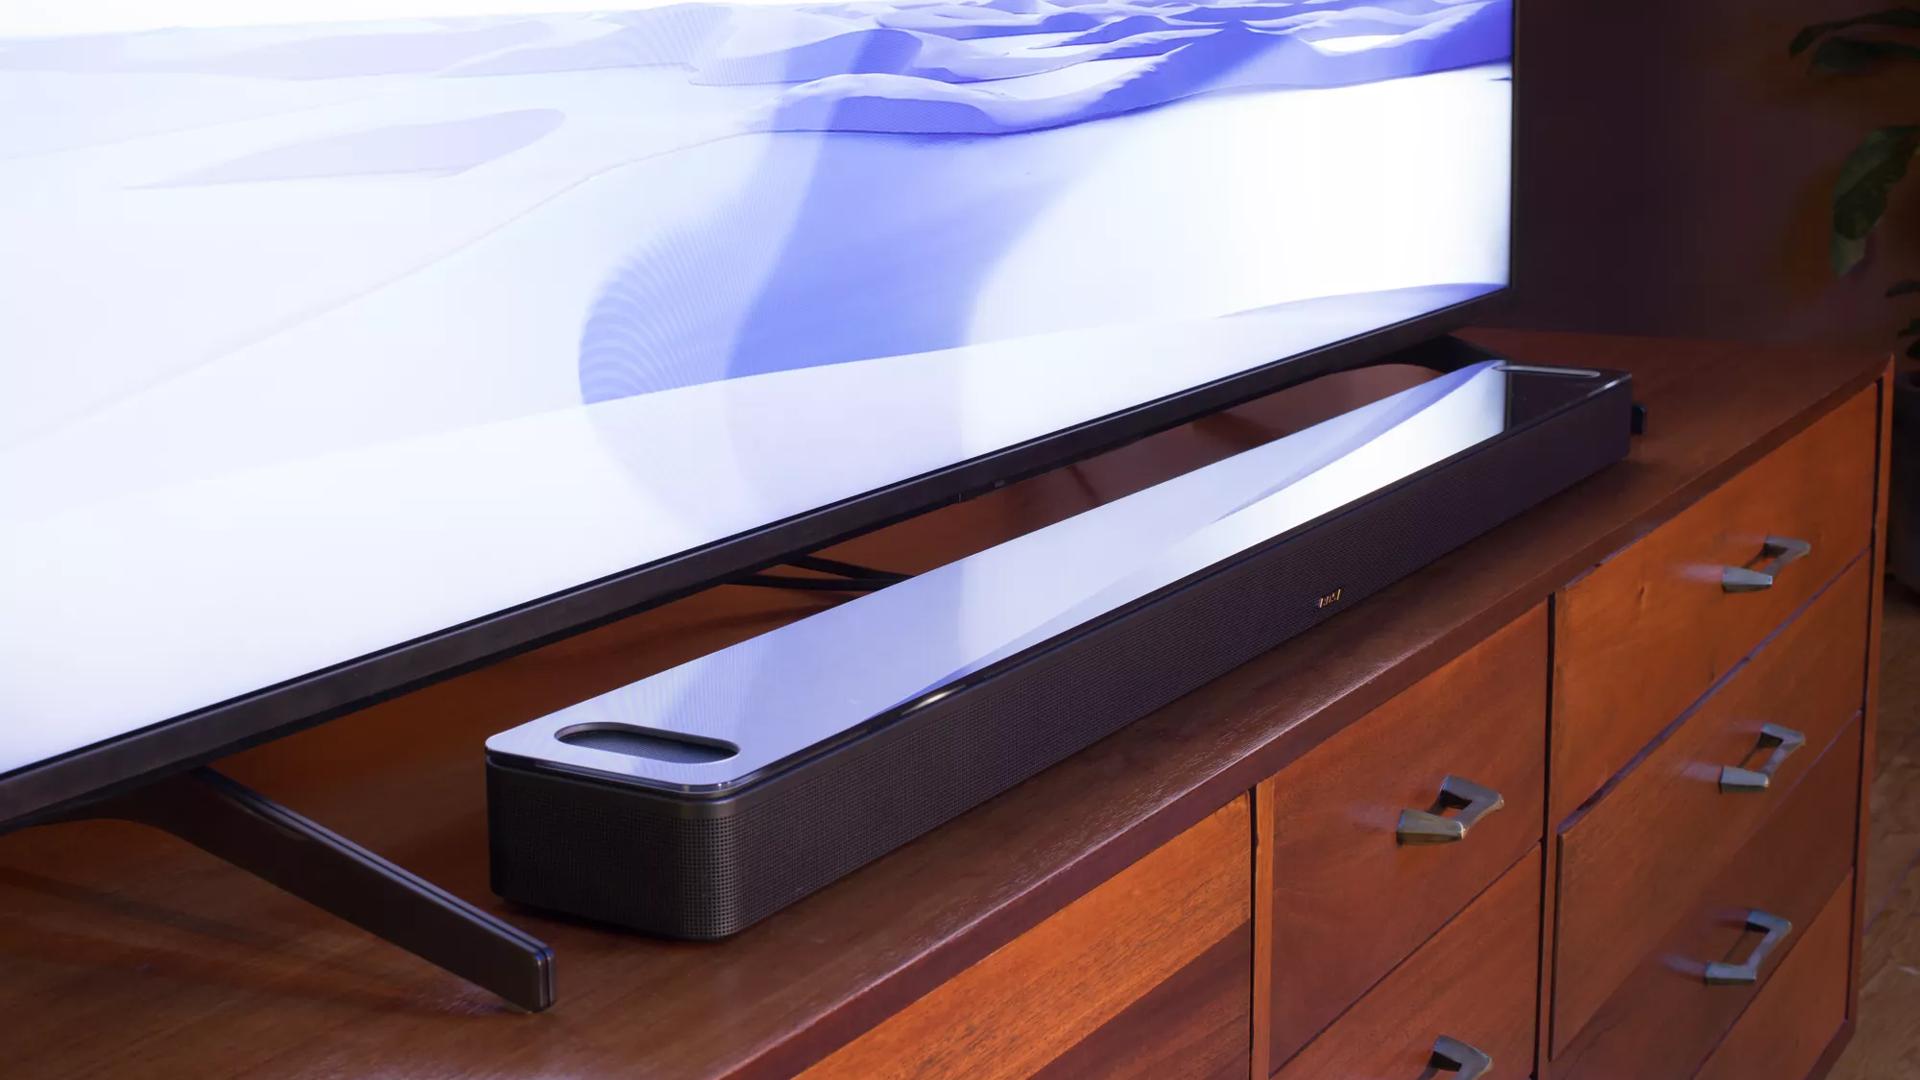 Bose Smart Soundbar 900 sitting on console in front of TV